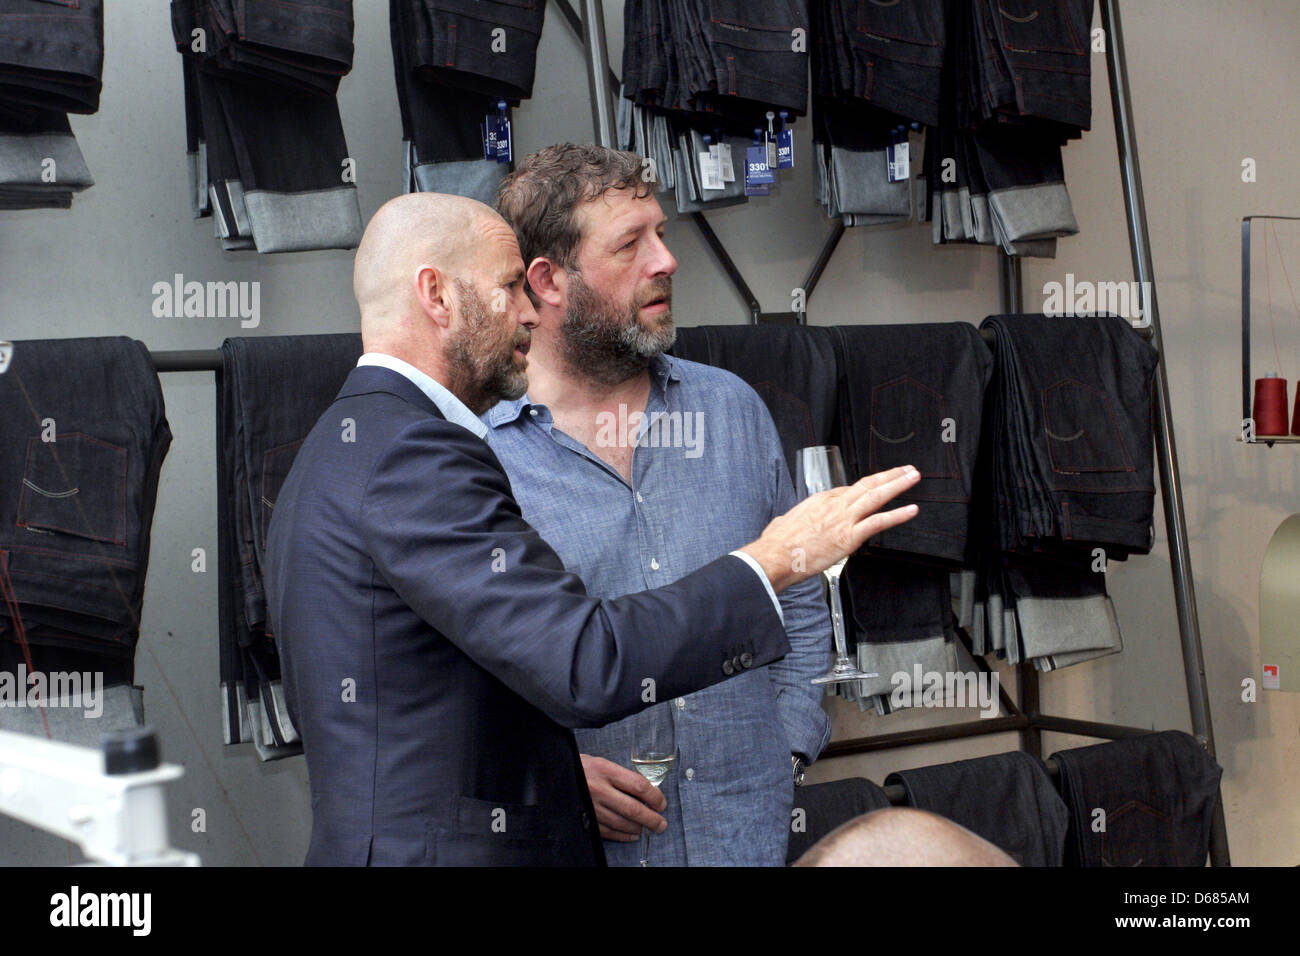 Head of the jeans label G Star, Jos van Tilburg, talks to head B&B, Karl Heinz Mueller (R) at a booth of the label at the fashion fair Bread & Butter